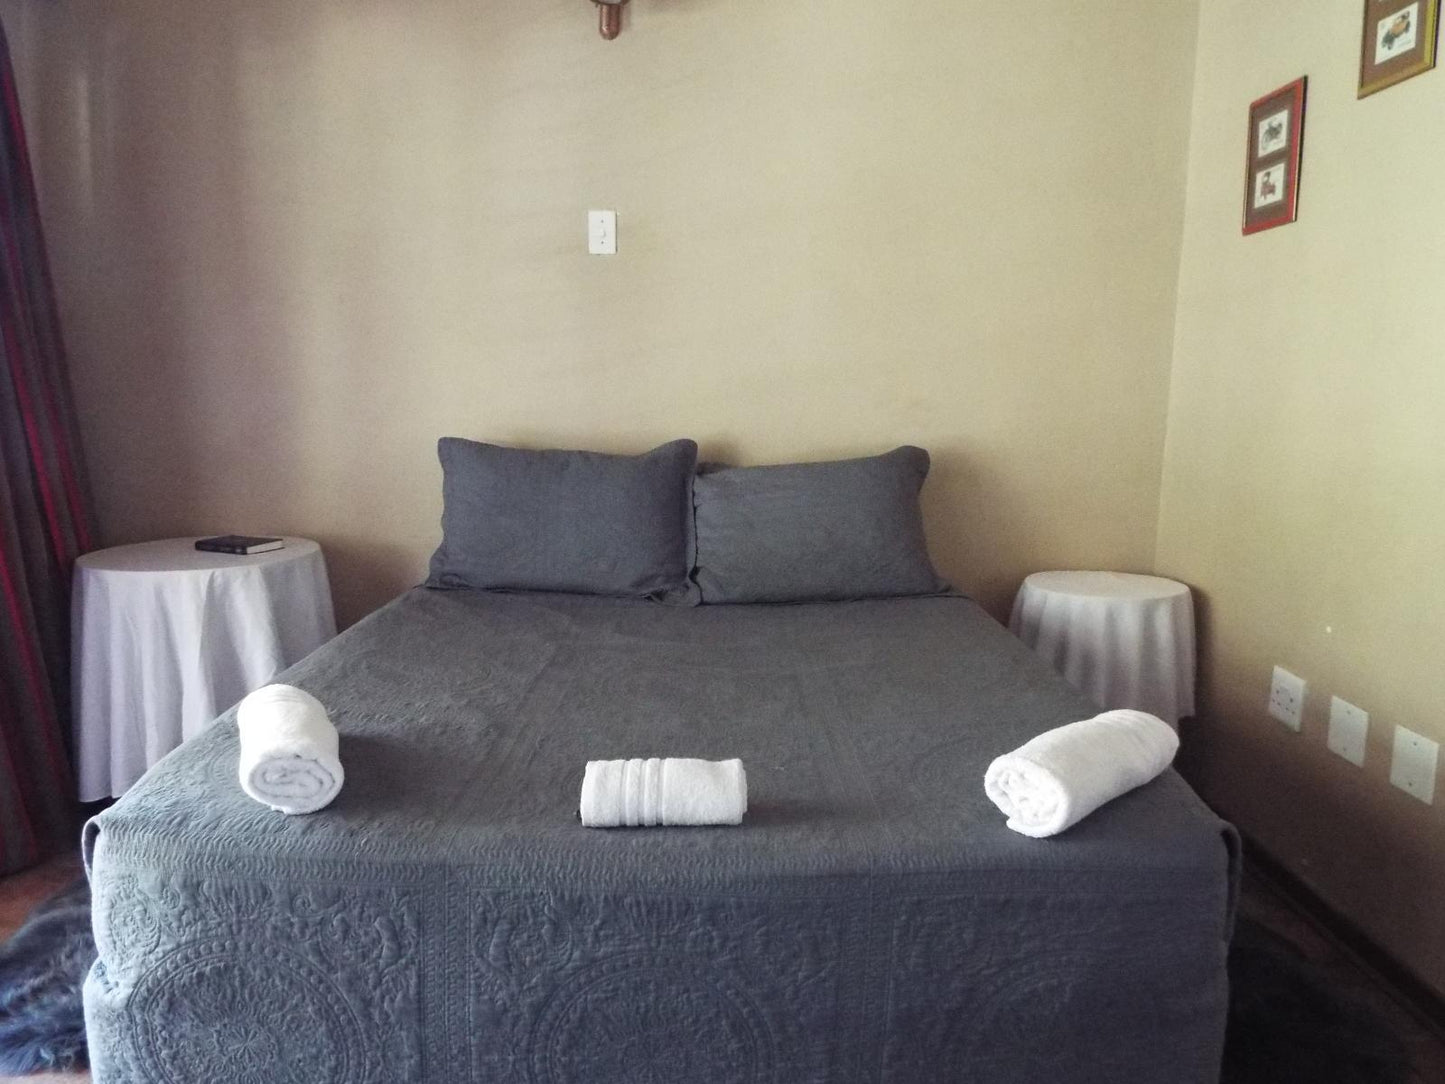 Self Catering Room 9 @ Aloes Country Inn